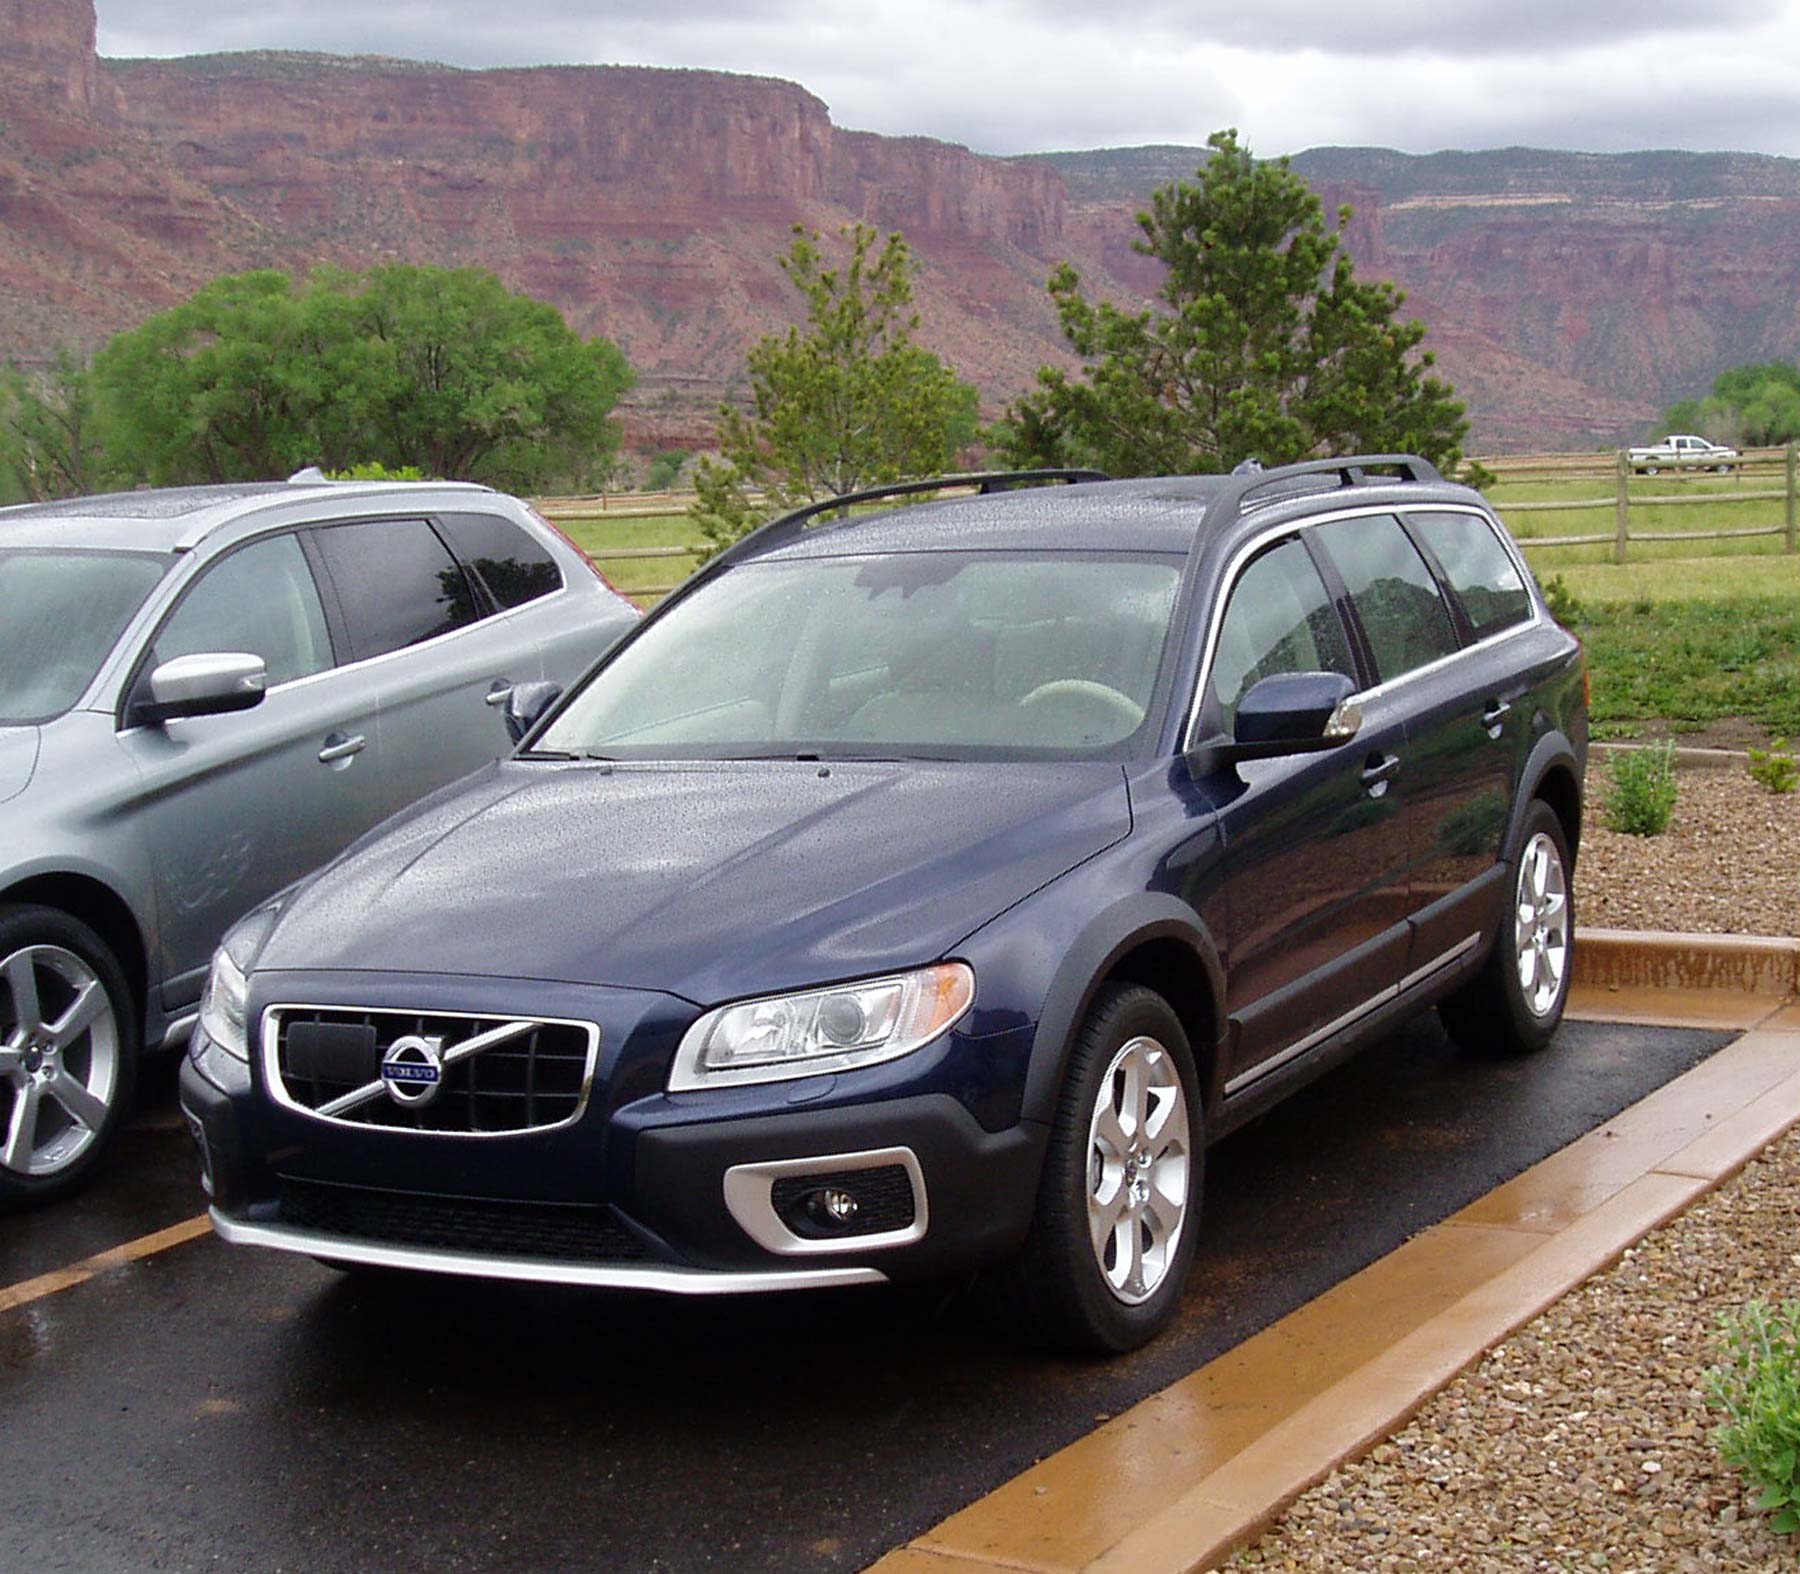 Test Drive: 2011 Volvo XC70 Wagon | Our Auto Expert